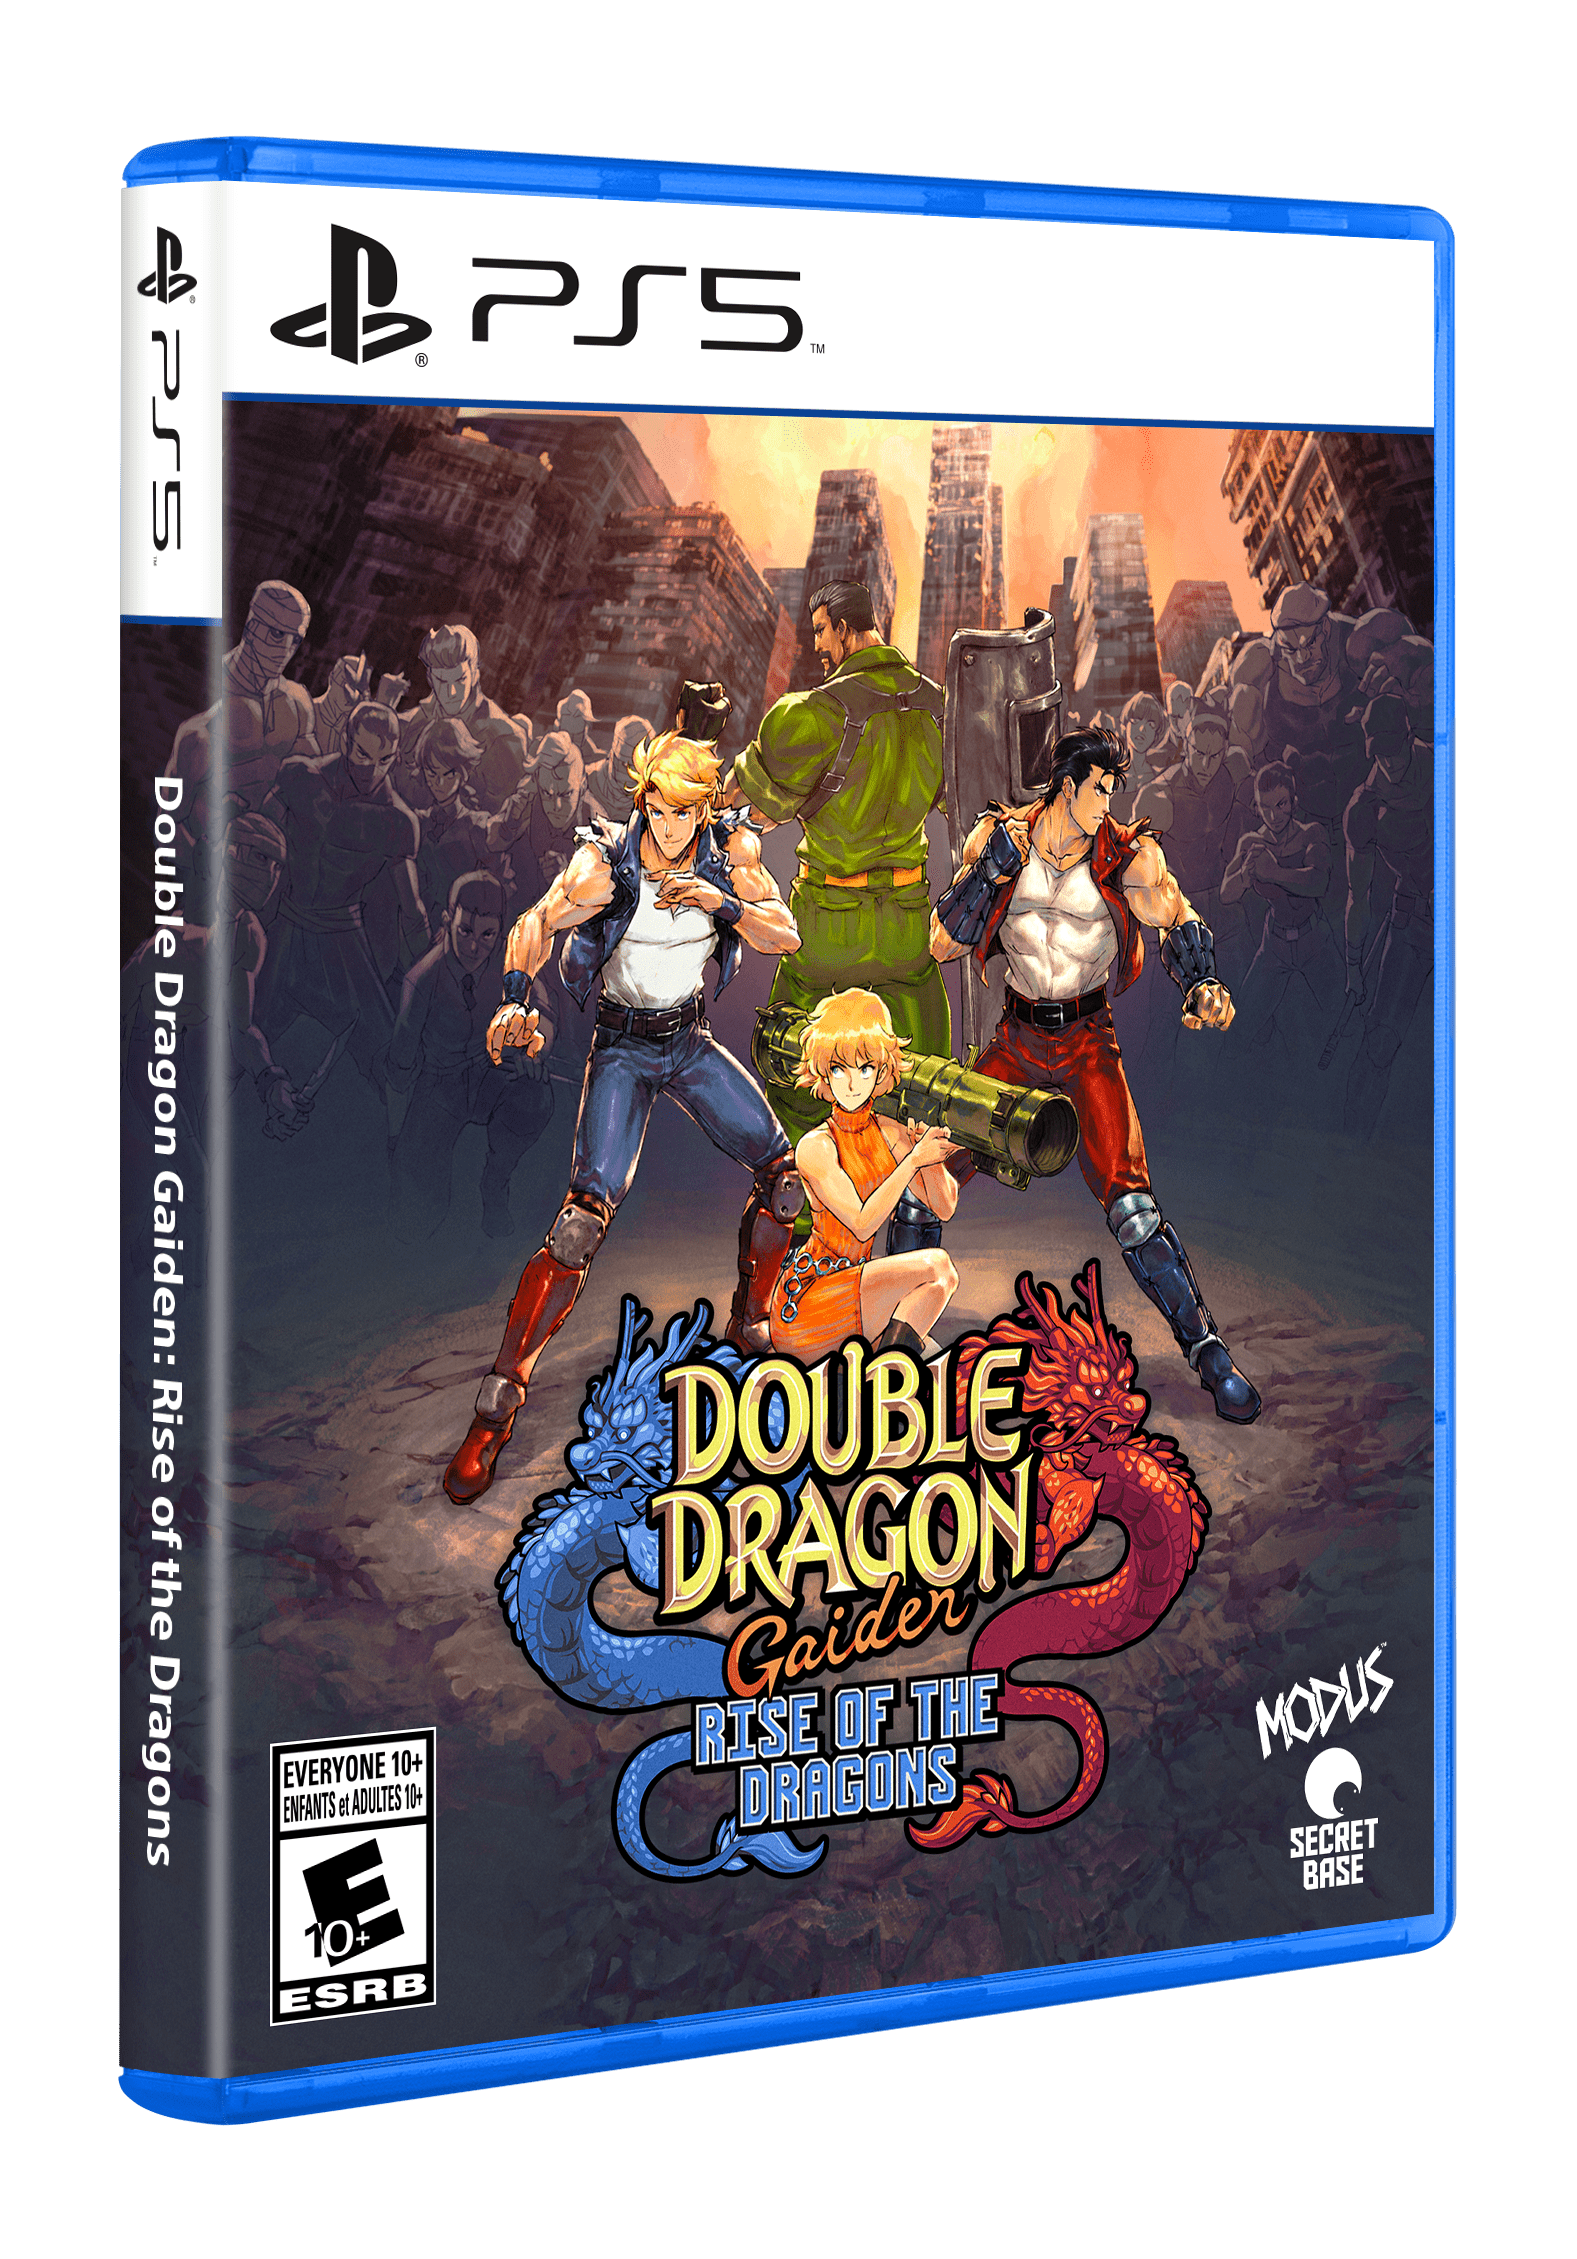 Double Dragon Gaiden: Rise of the Dragons - Game Overview